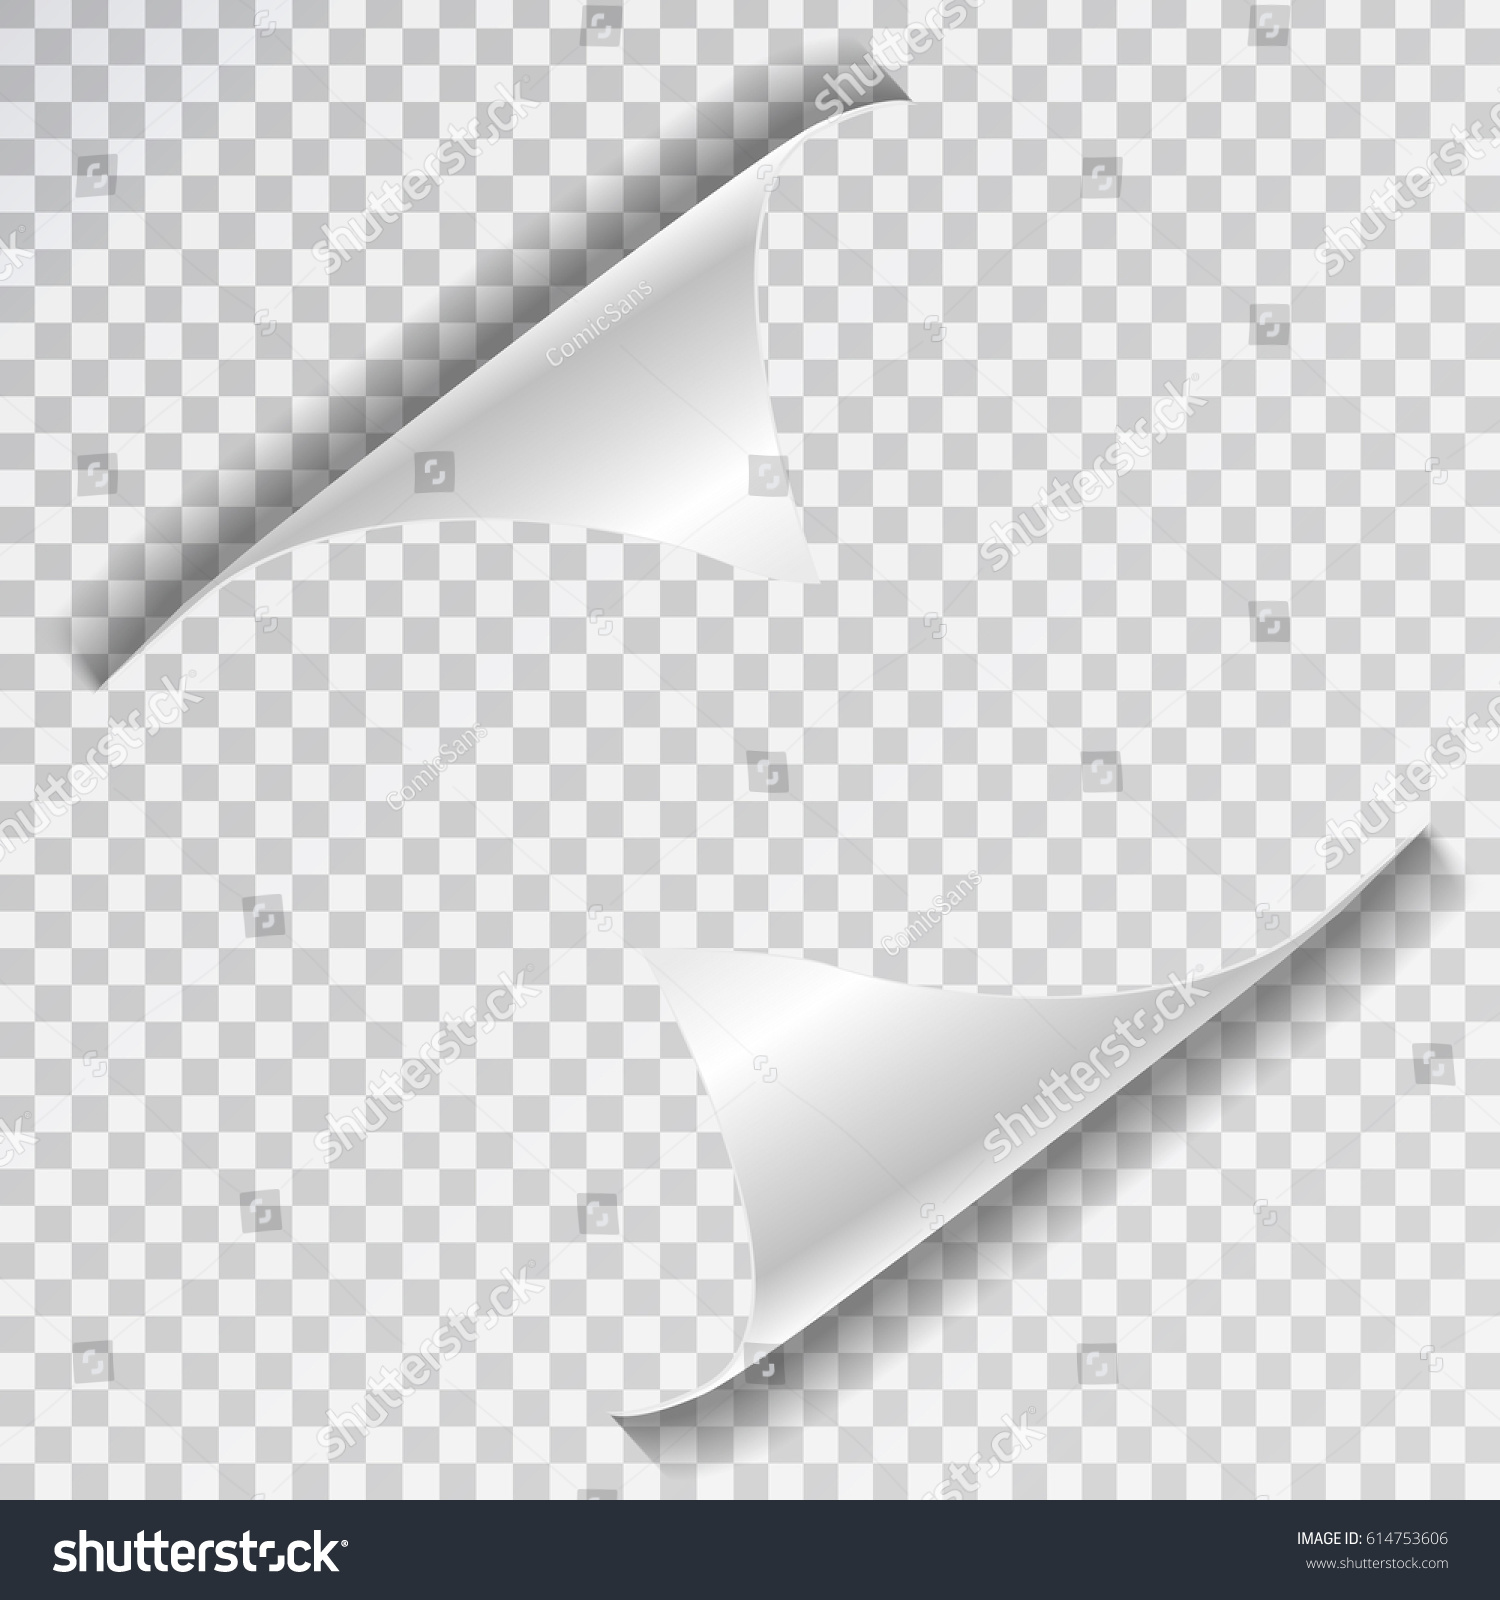 Vector Realistic White Paper Page Curl Stock Vector 614753606 ...